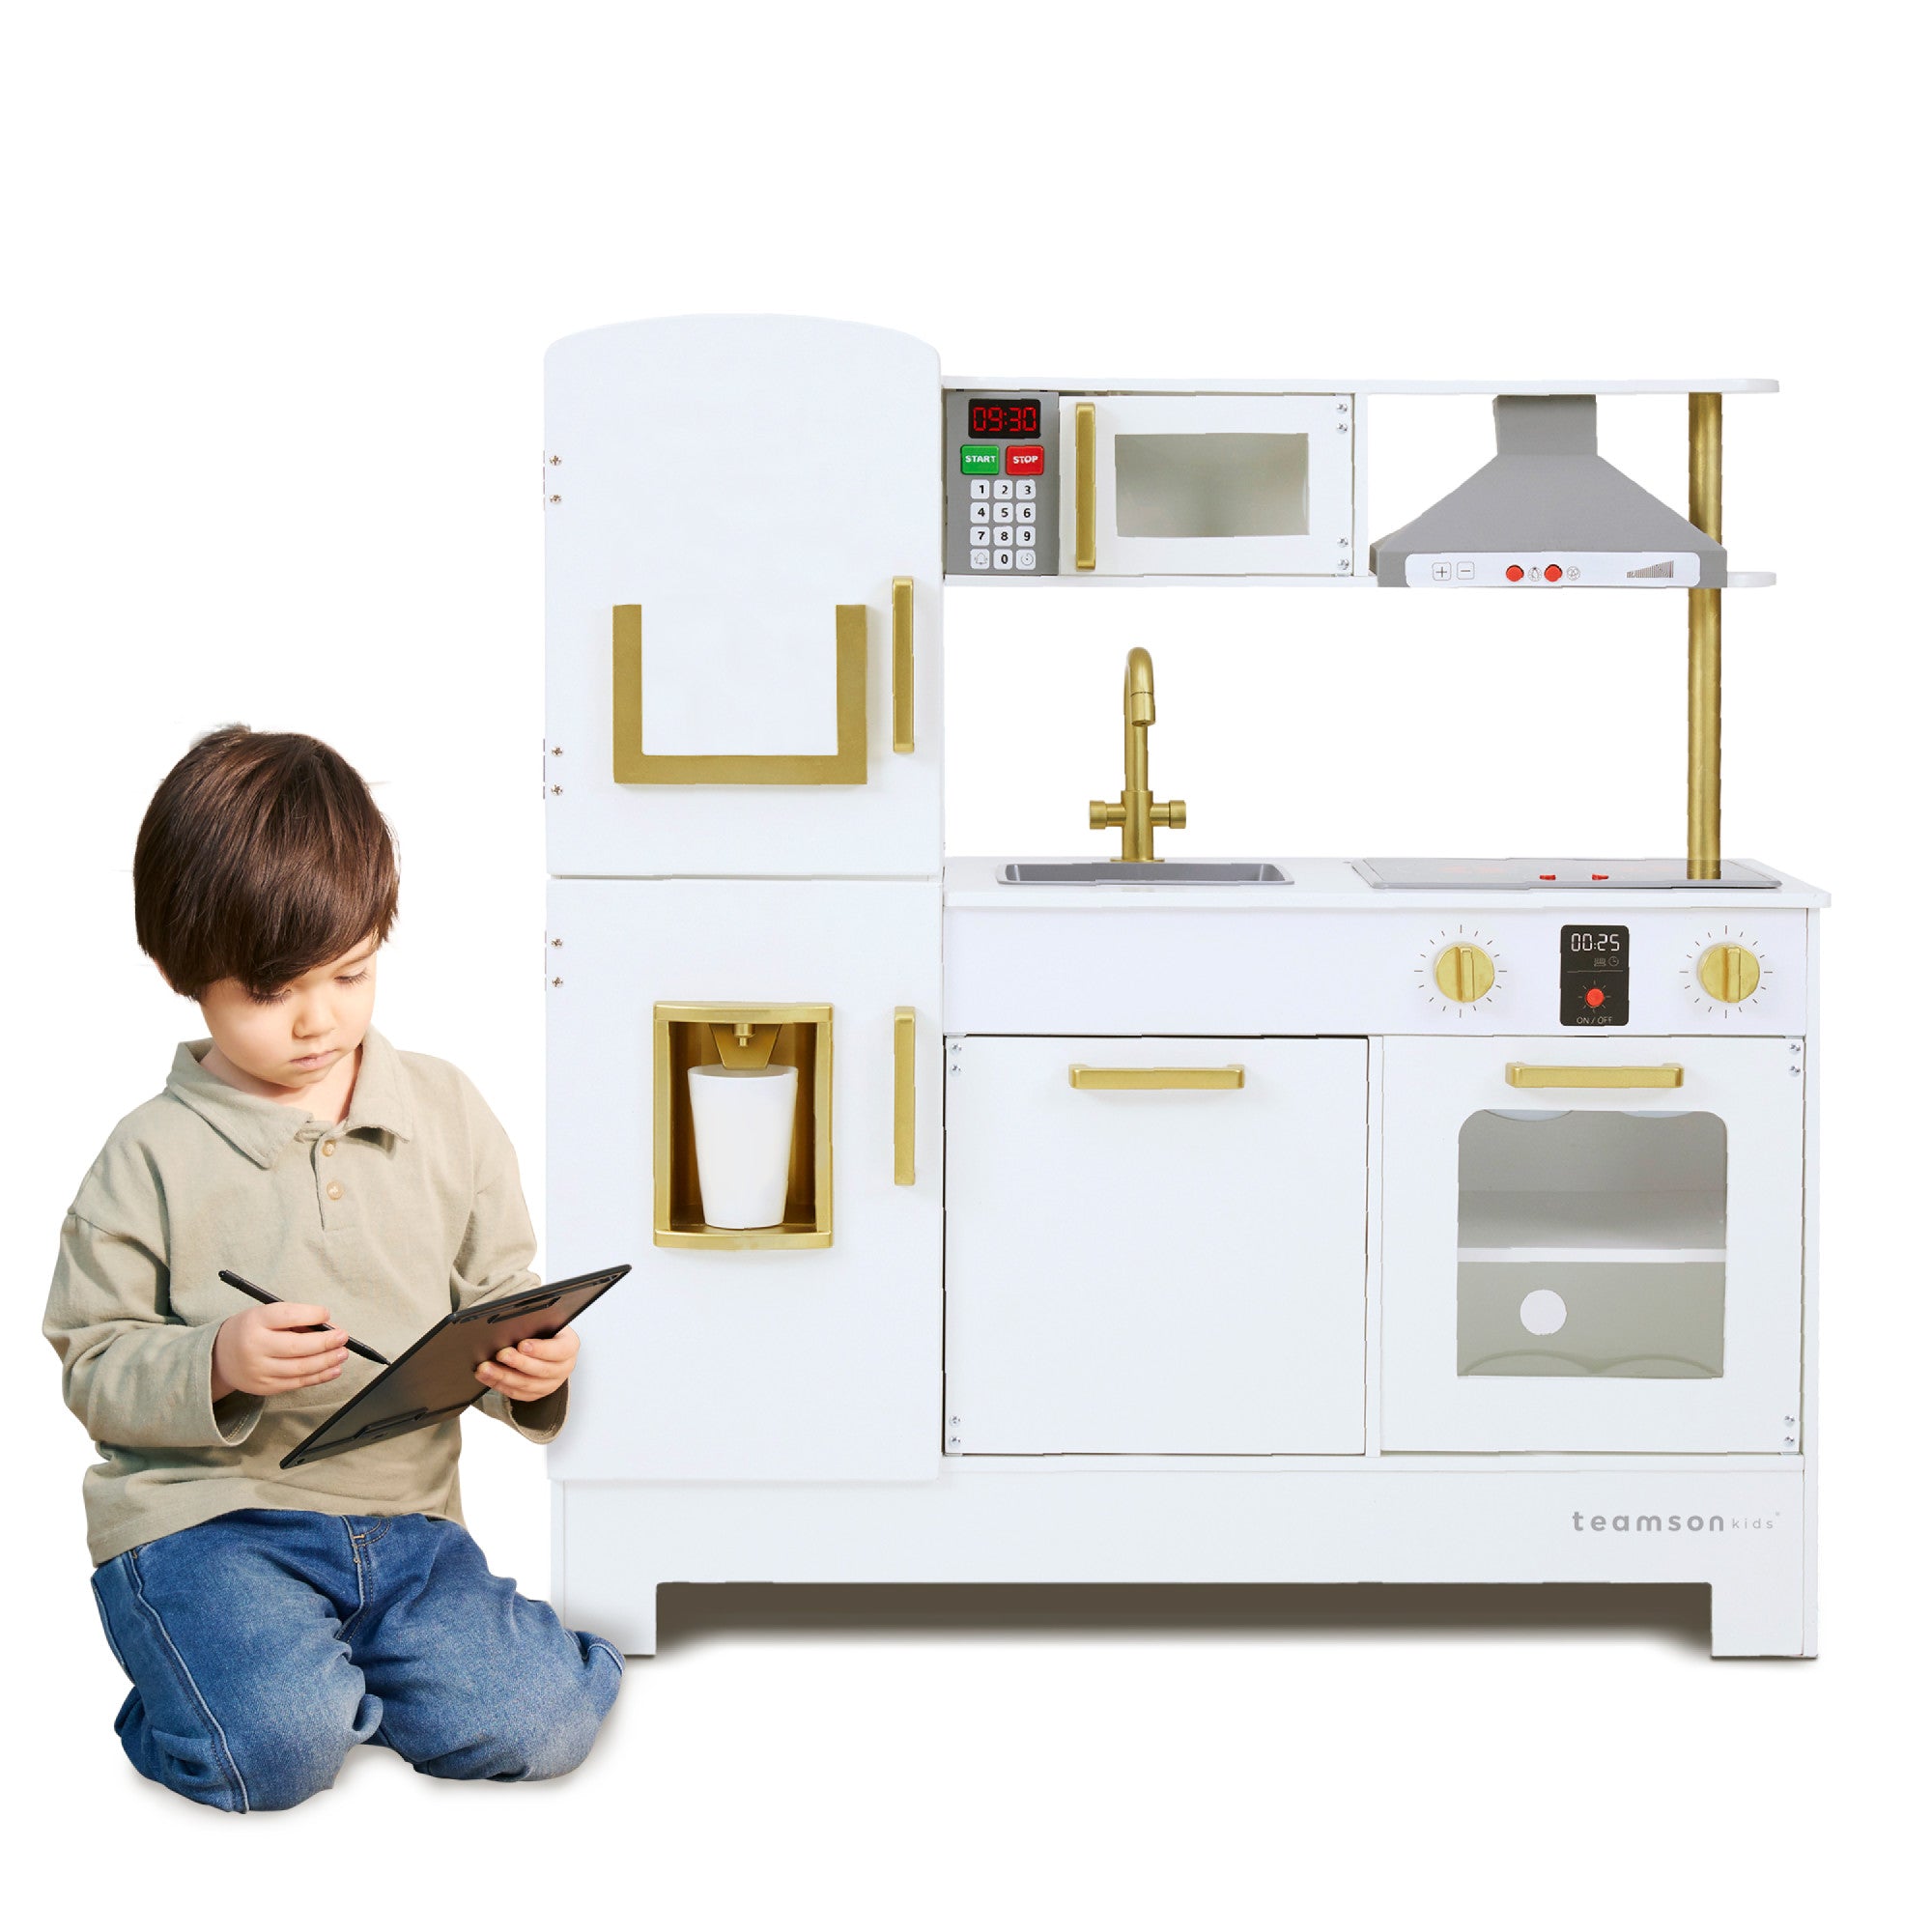 Teamson Kids All-in-One Little Chef Munich Play Kitchen with Lights and Sound Effects, White